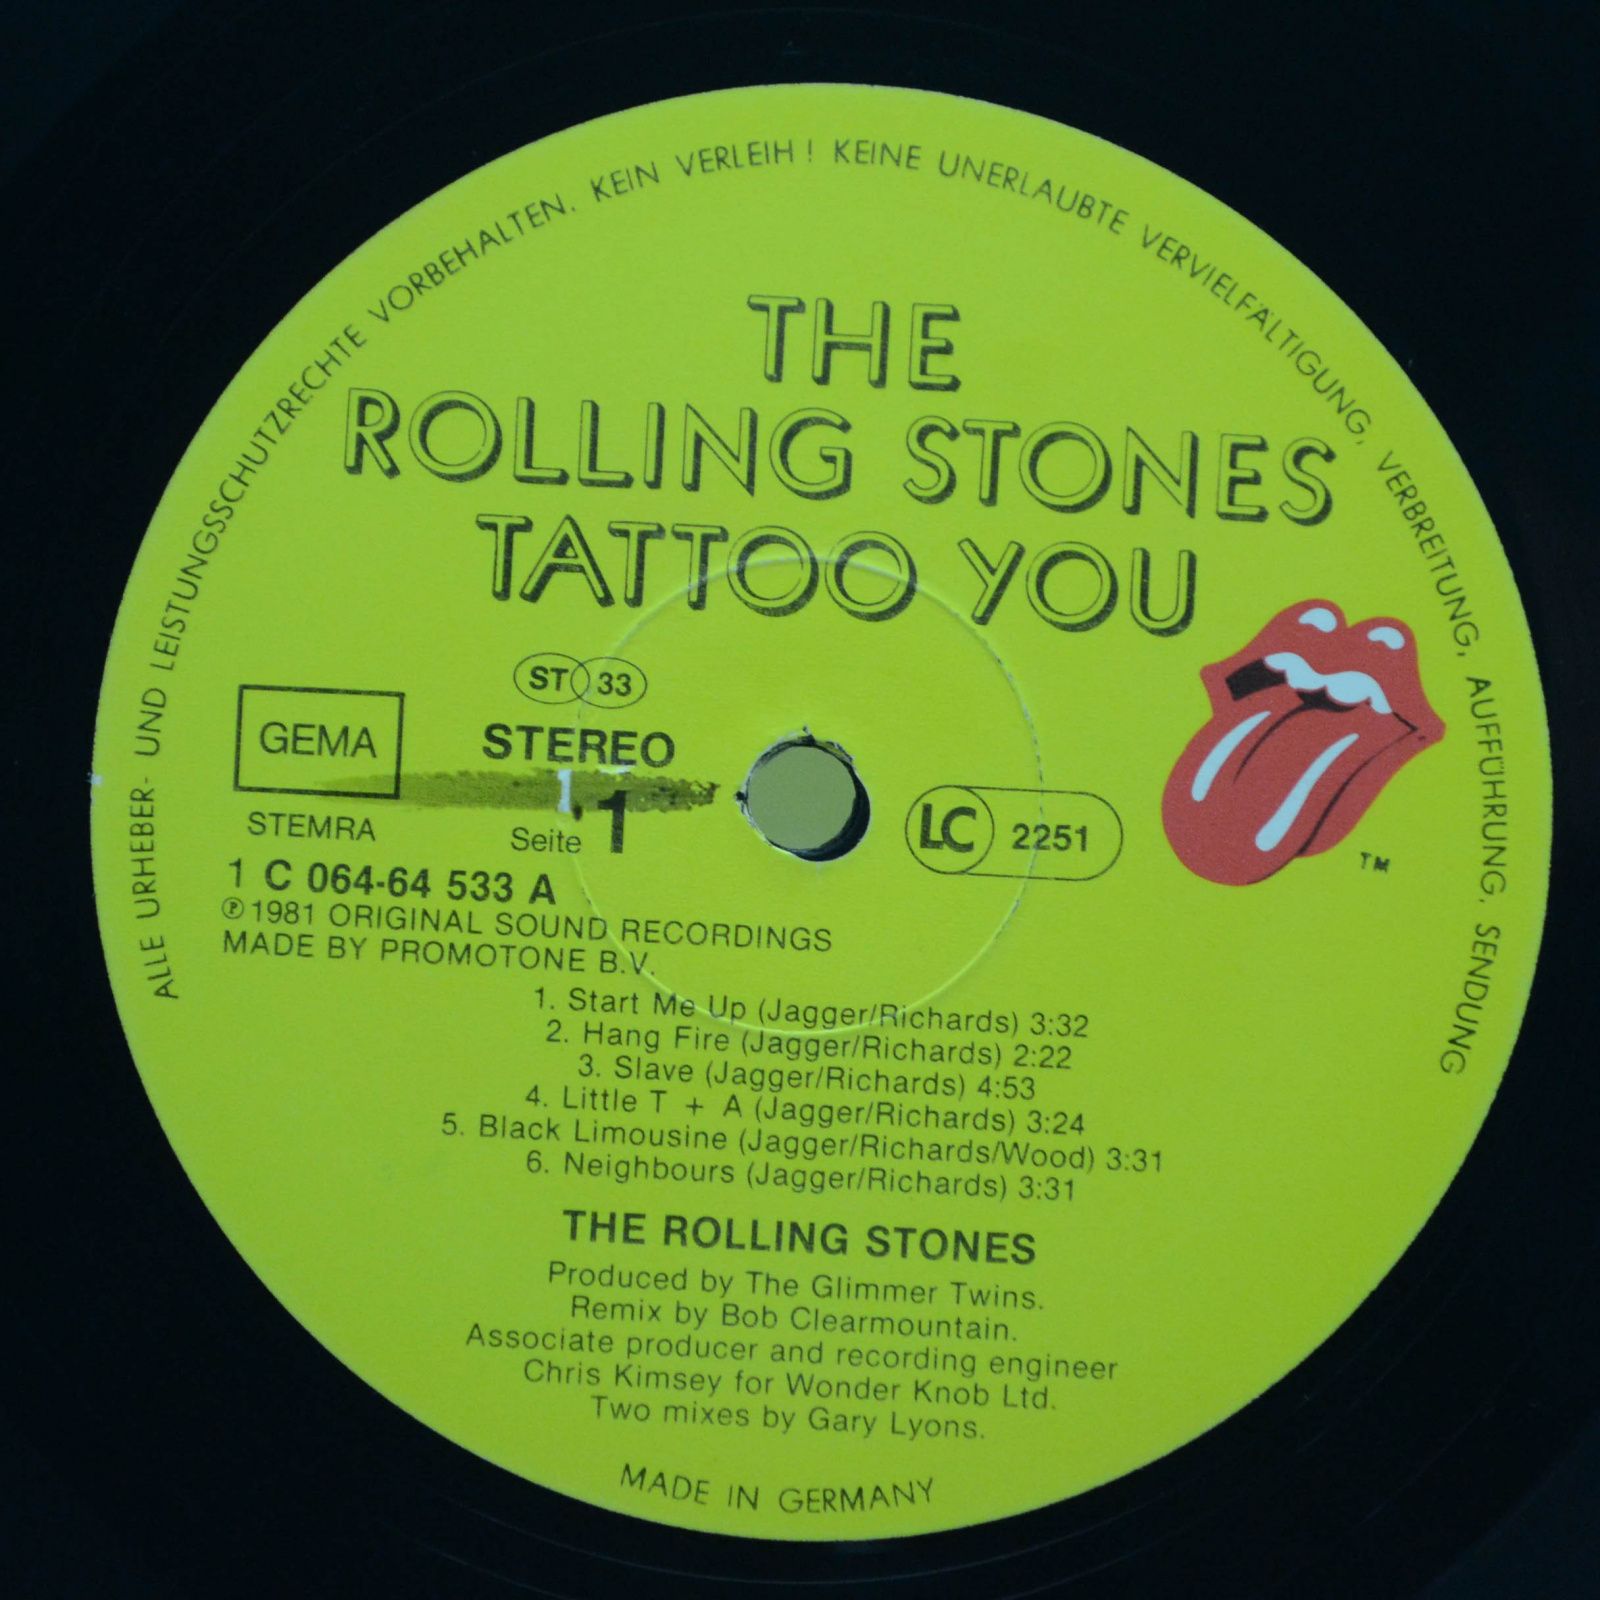 Rolling Stones — Tattoo You, 1981